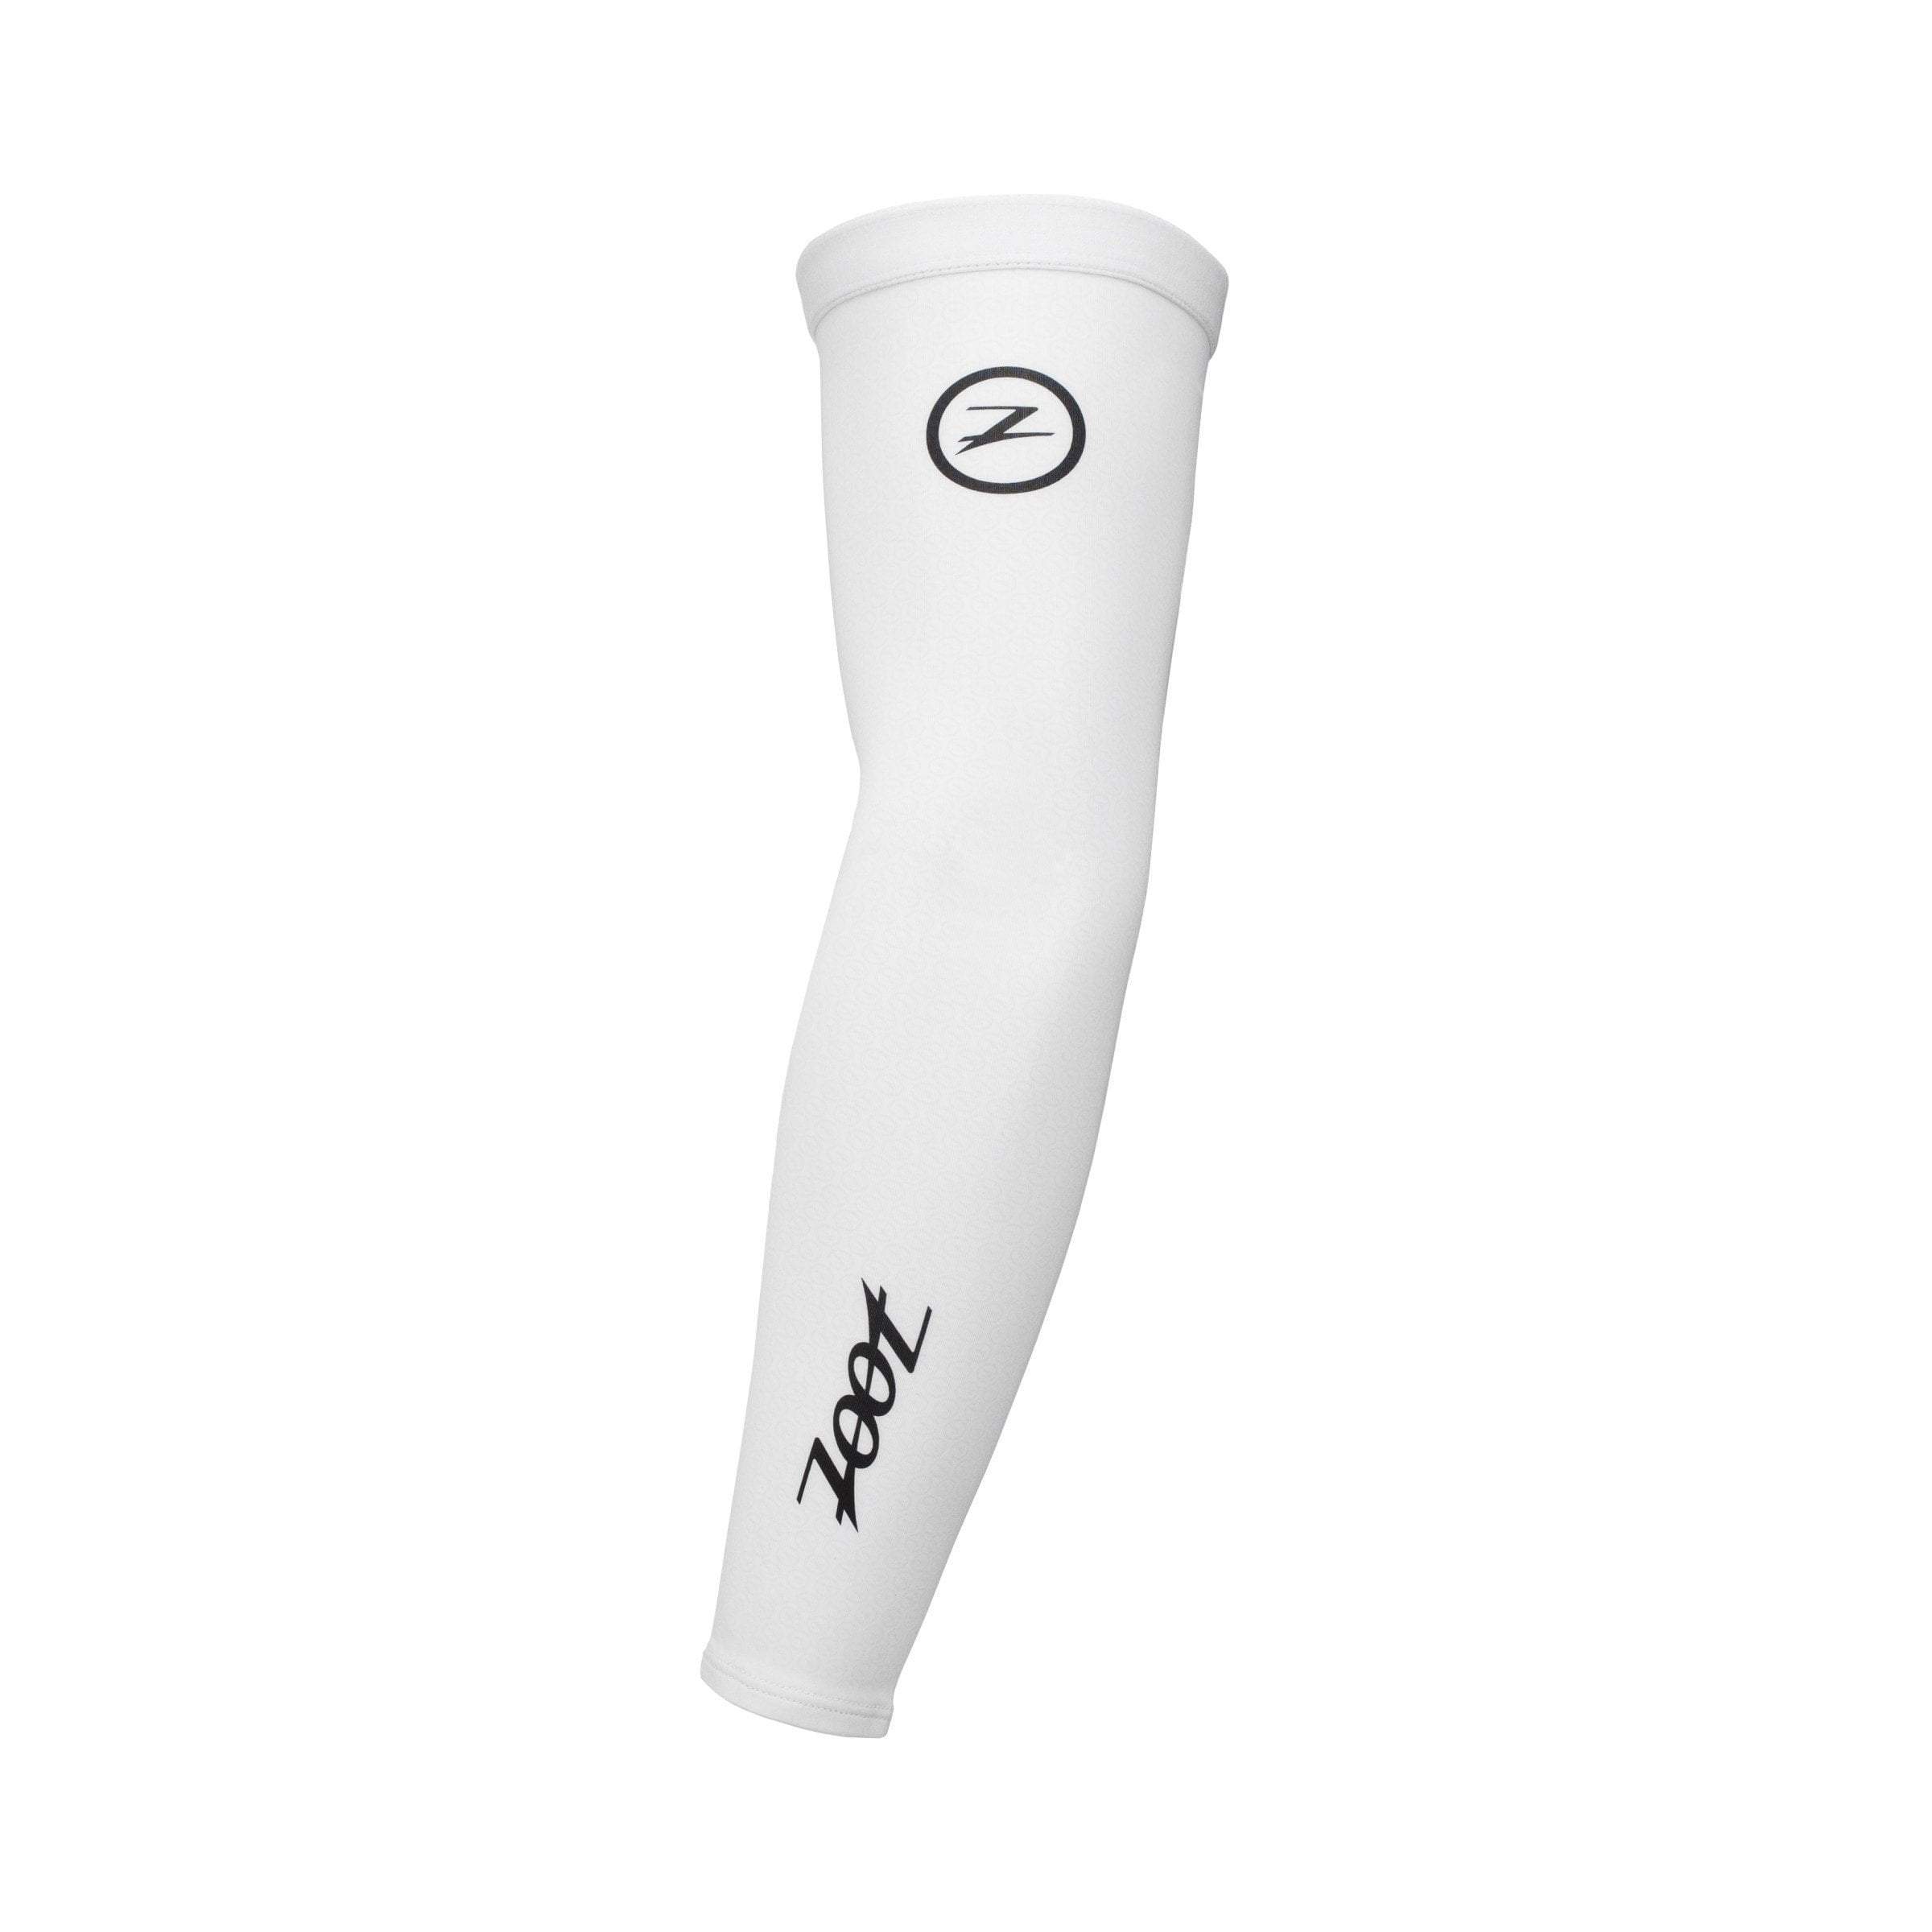 Zoot Sports ARM COOLERS X-SMALL / WHITE UNISEX CHILL OUT ARM COOLERS